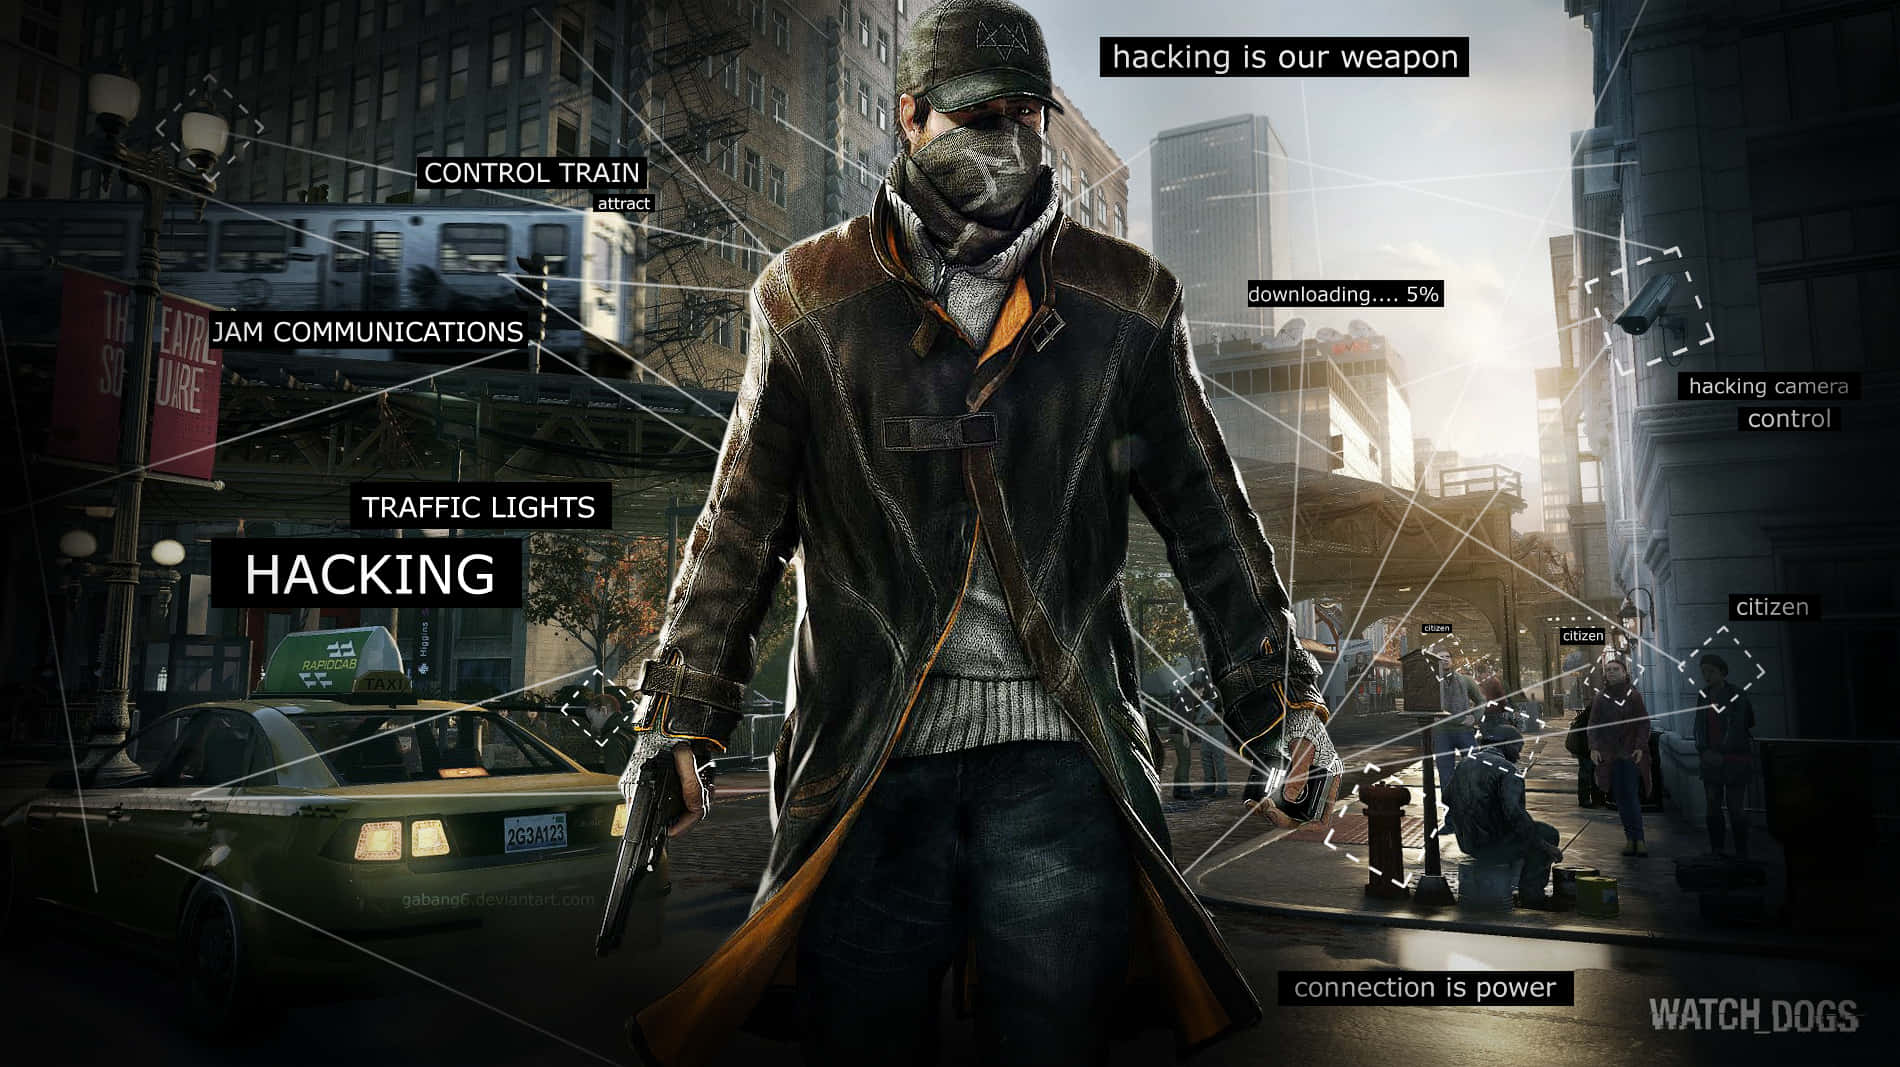 Introducing Watch Dogs. Download and Play Now! Wallpaper